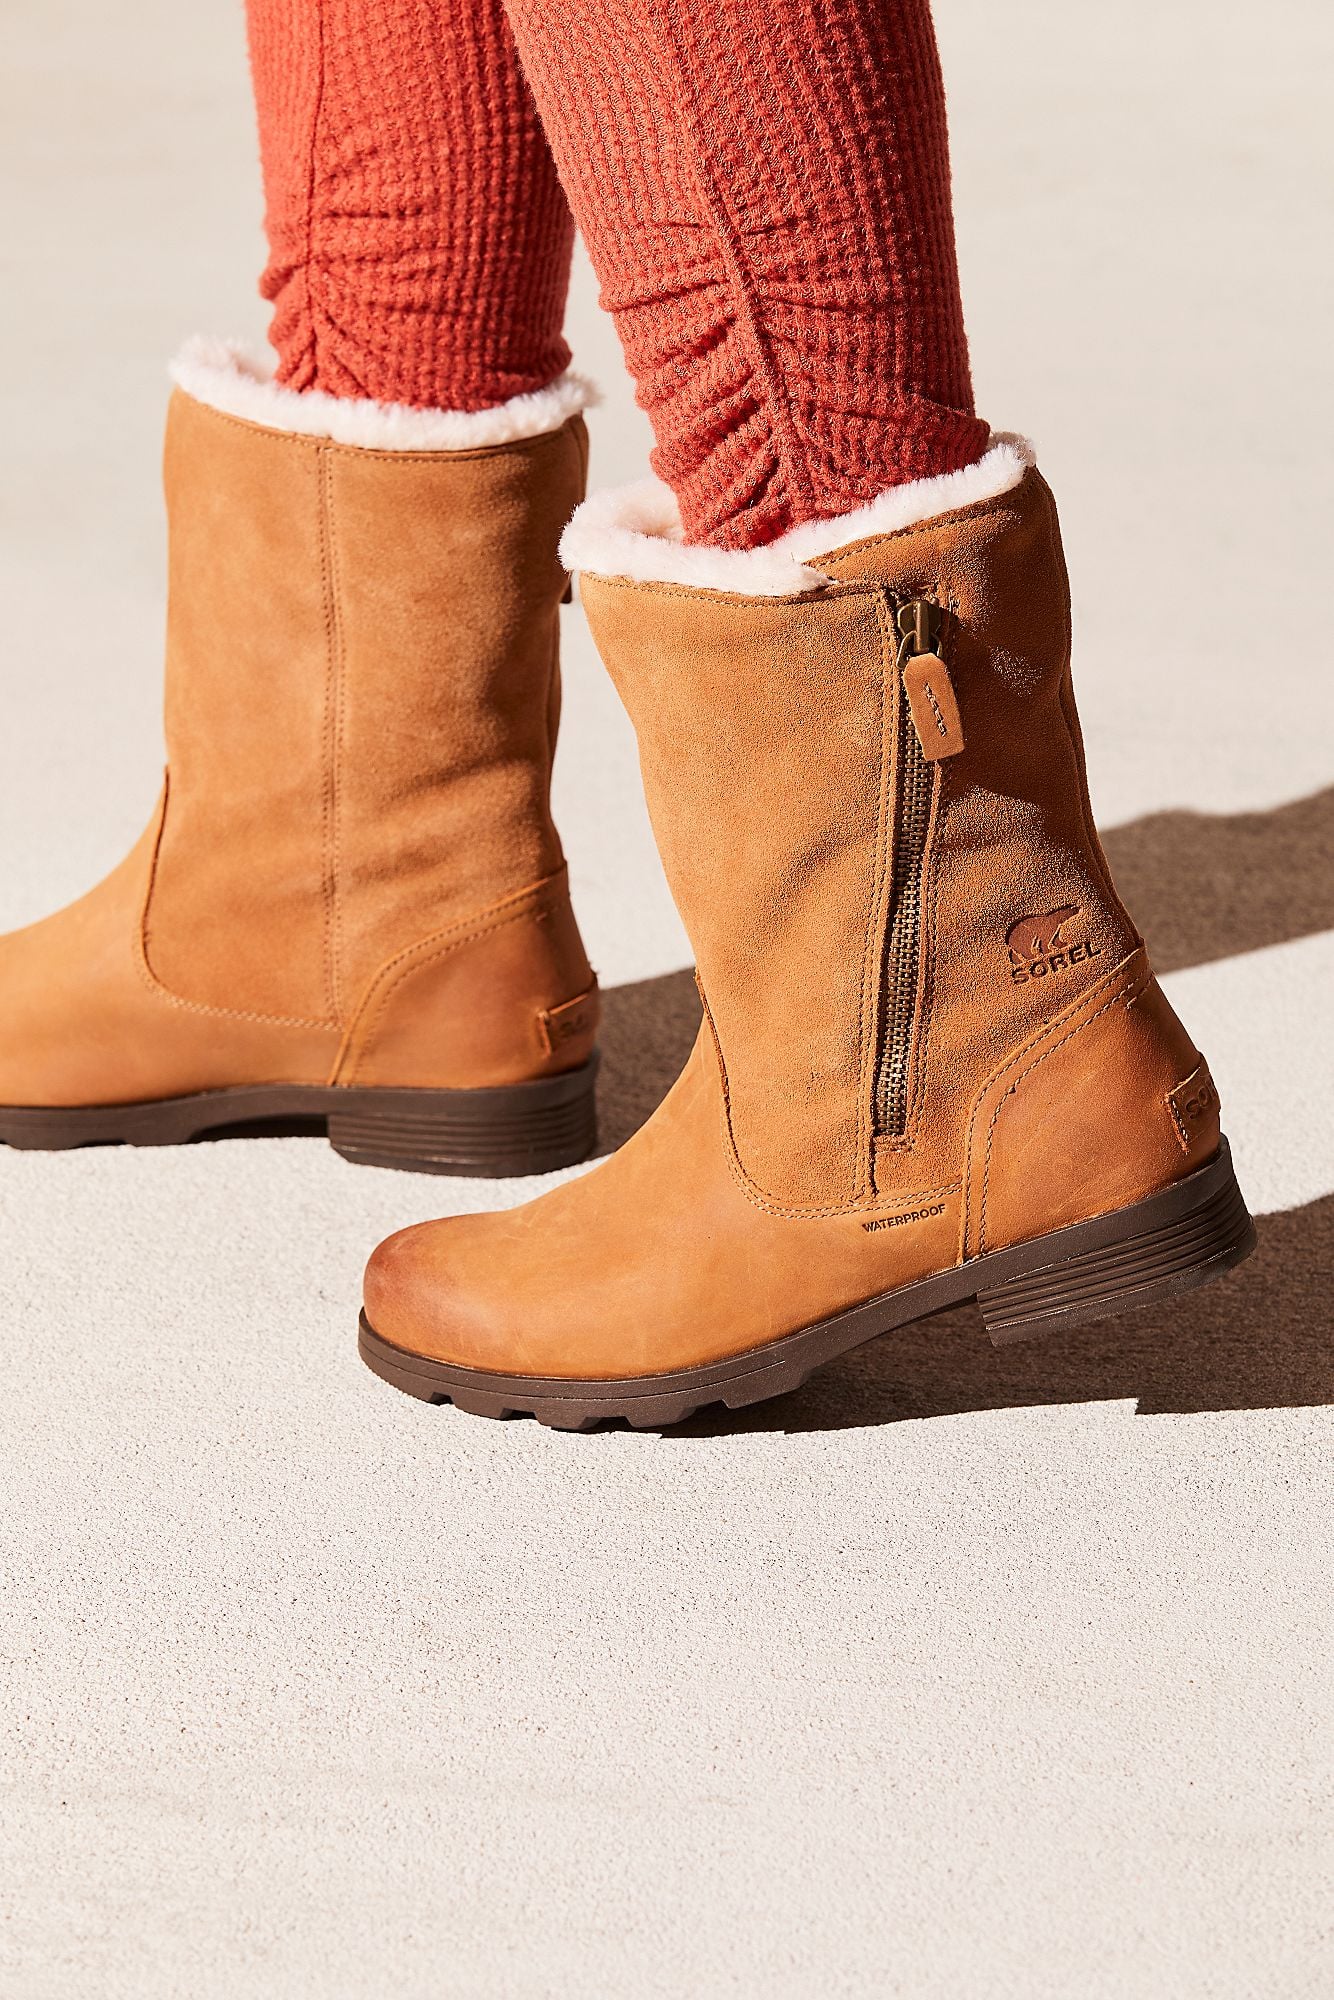 emelie foldover weather boot